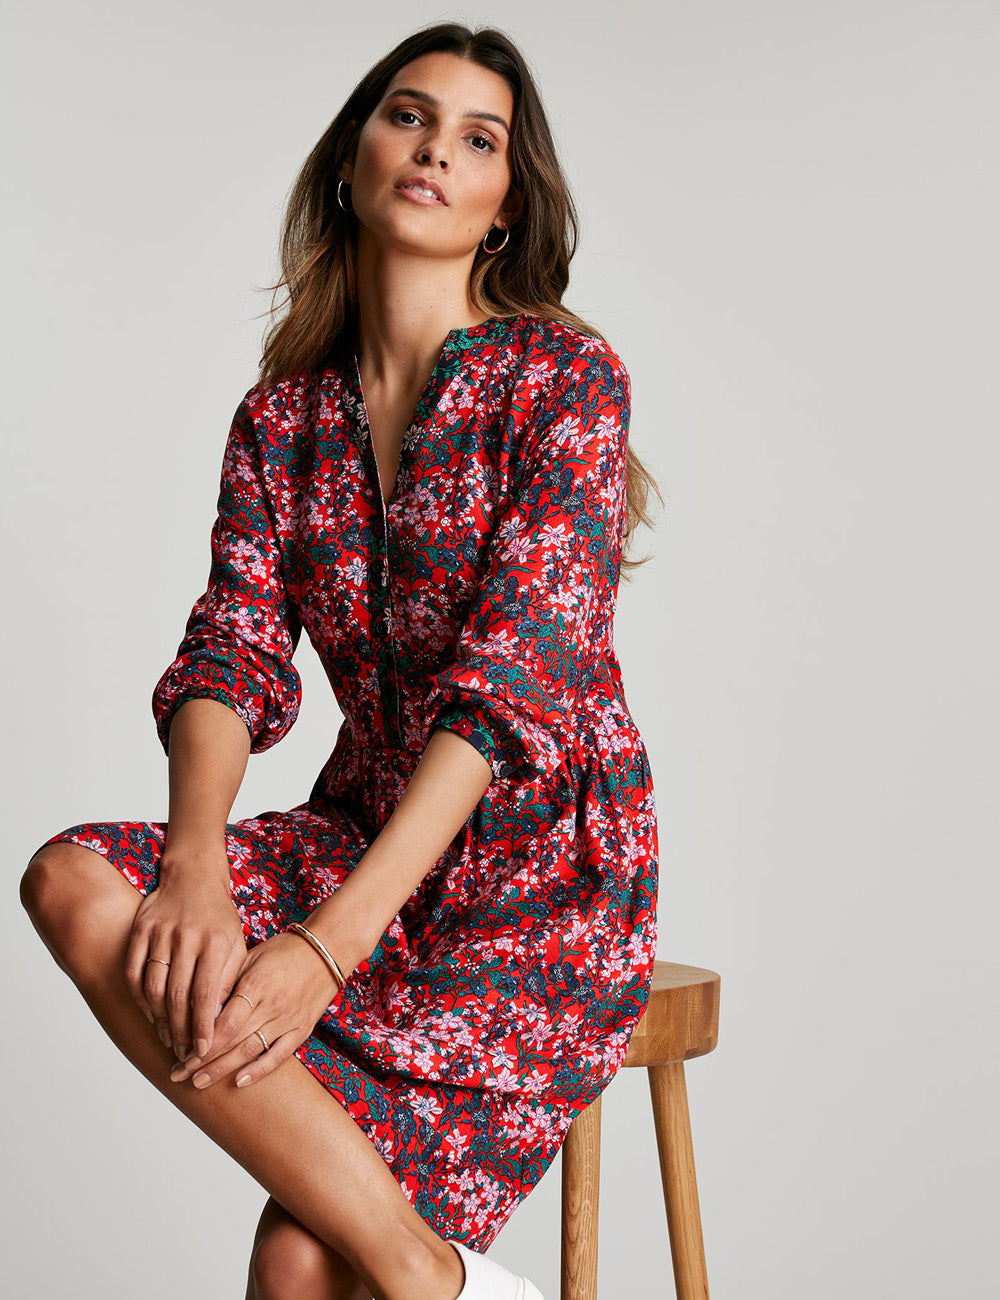 Joules Sophia Dress - Red Floral